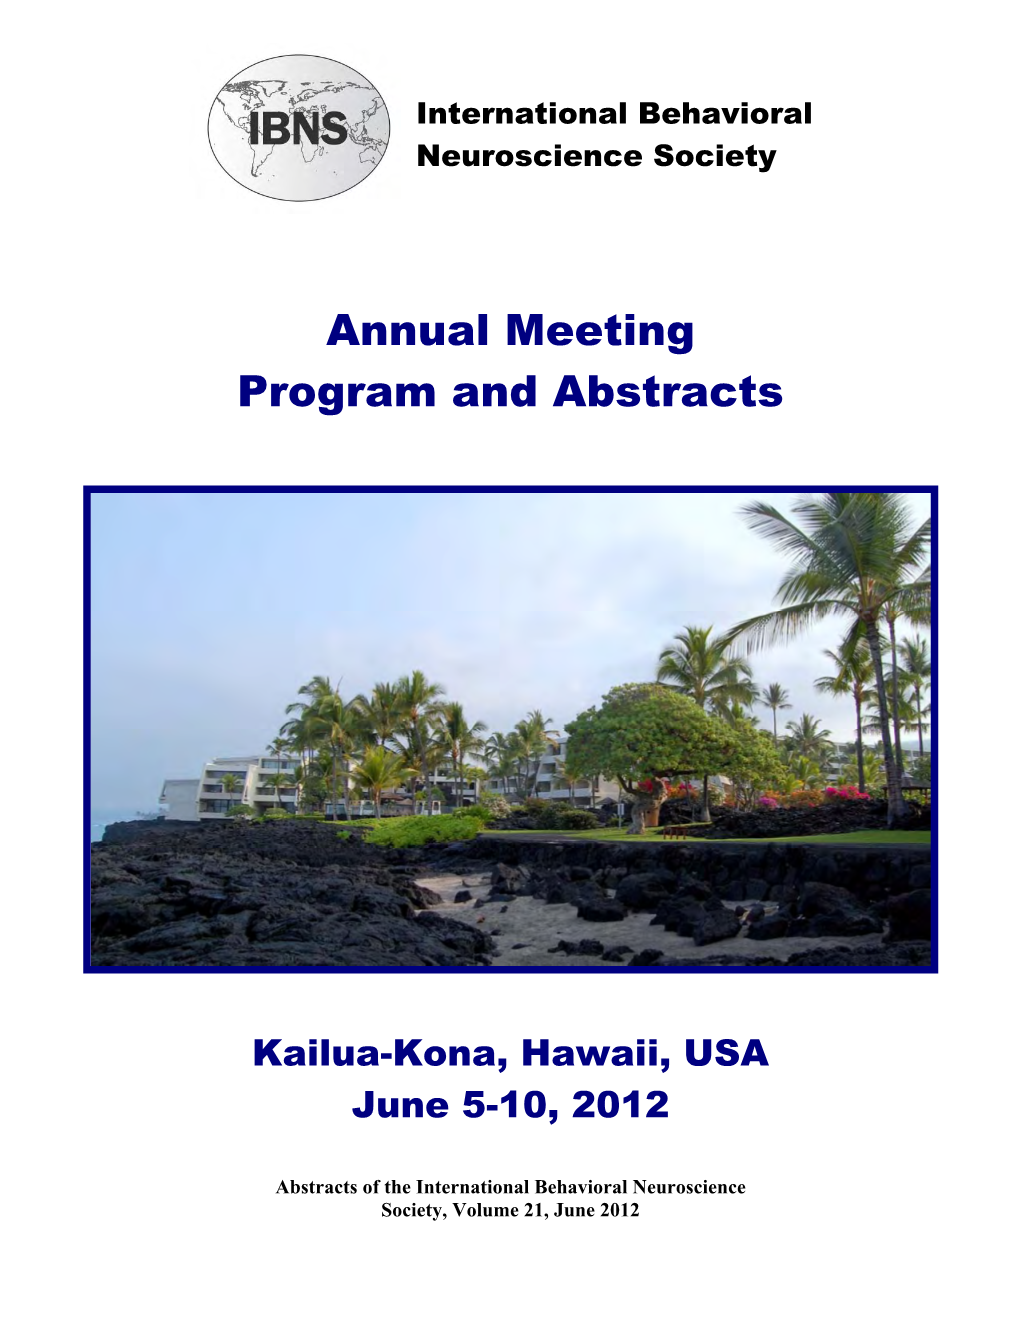 Annual Meeting Program and Abstracts